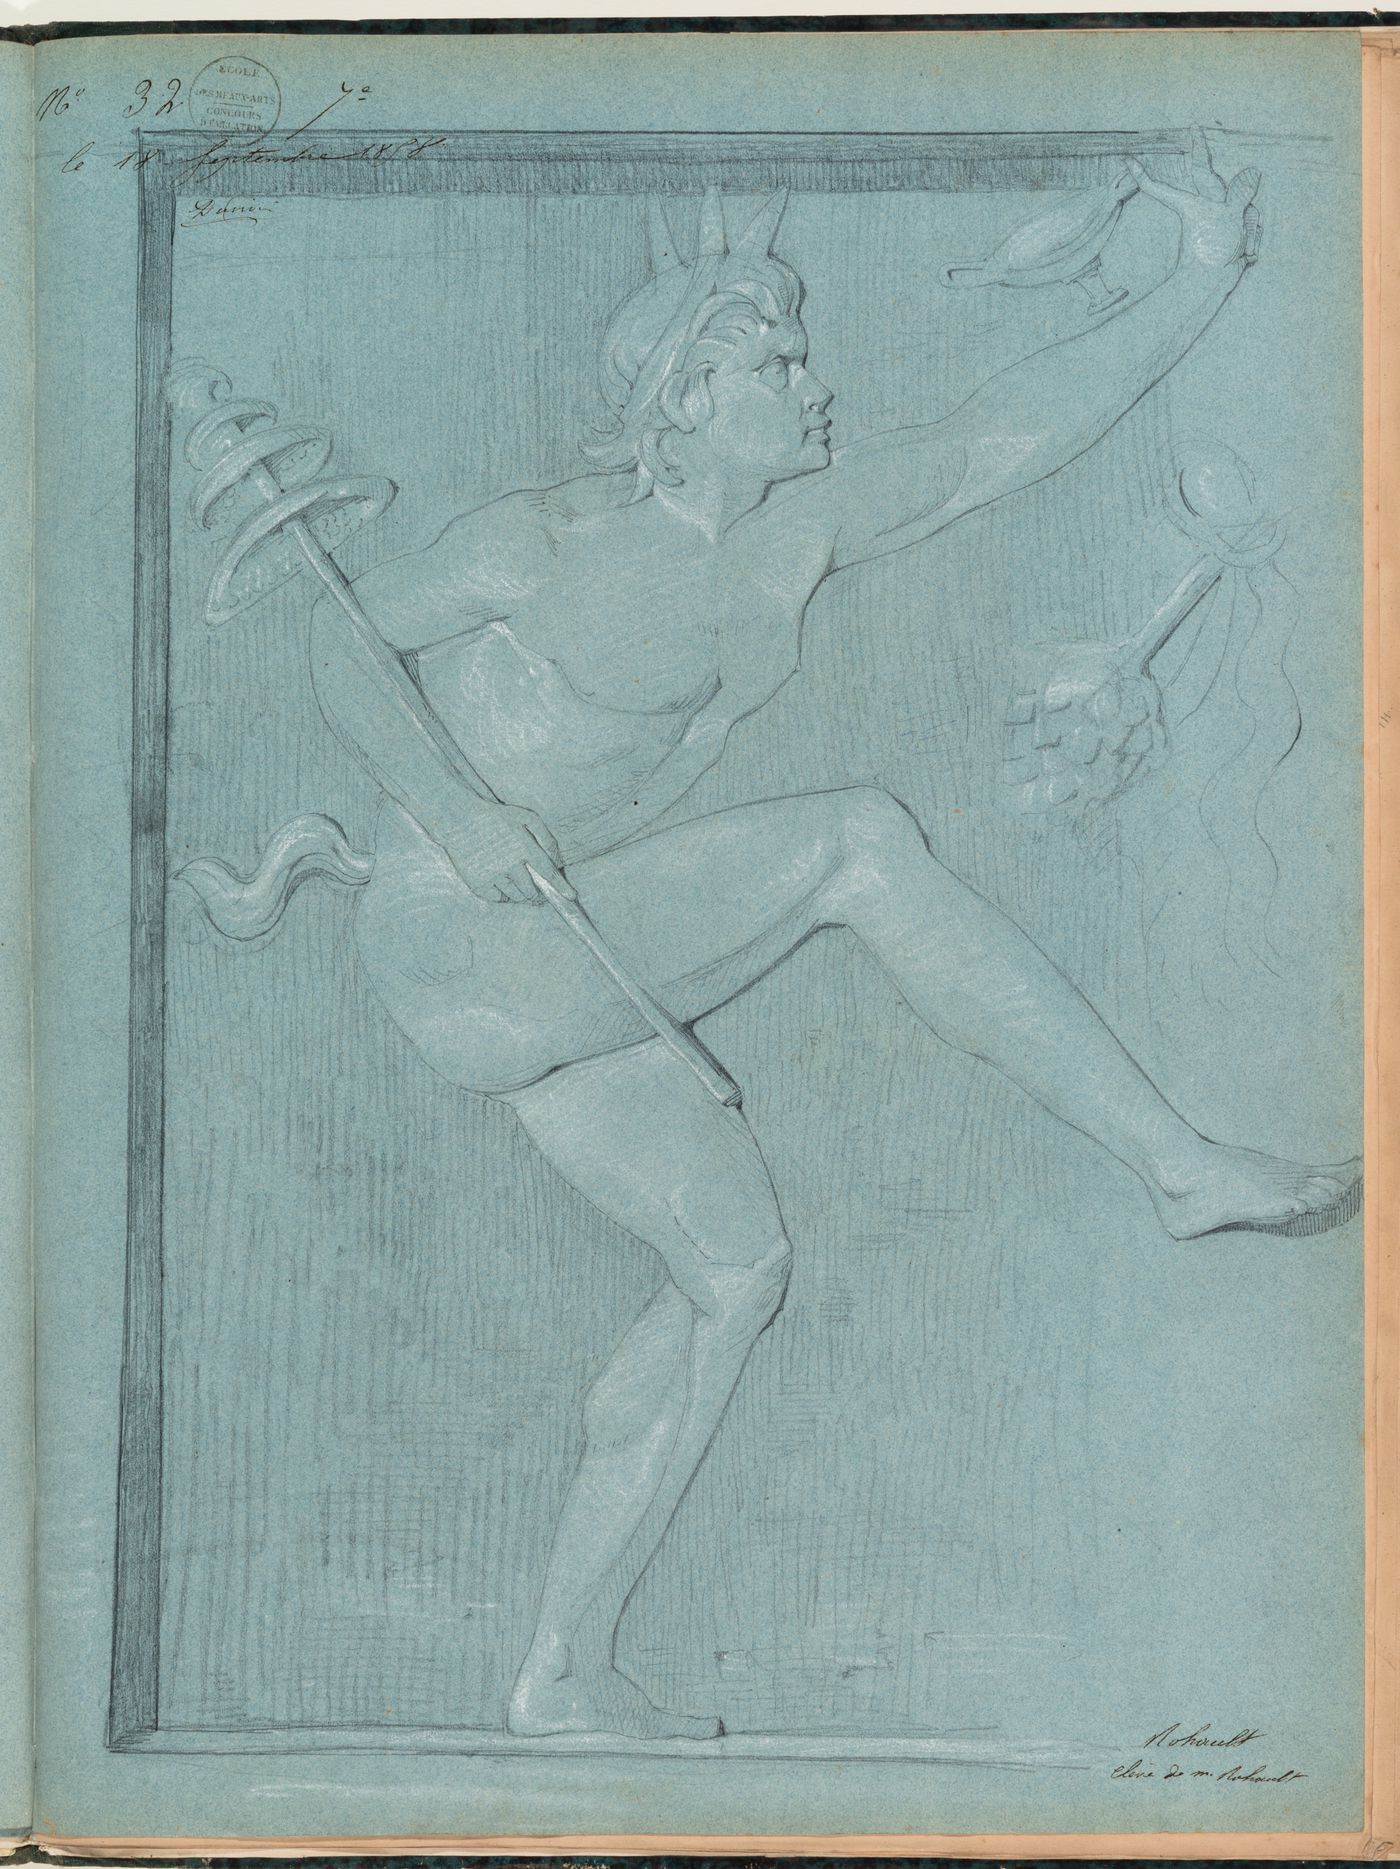 Concours d'émulation entry, 18 September 1858: Study of a satyr figure, probably from a frieze or metope